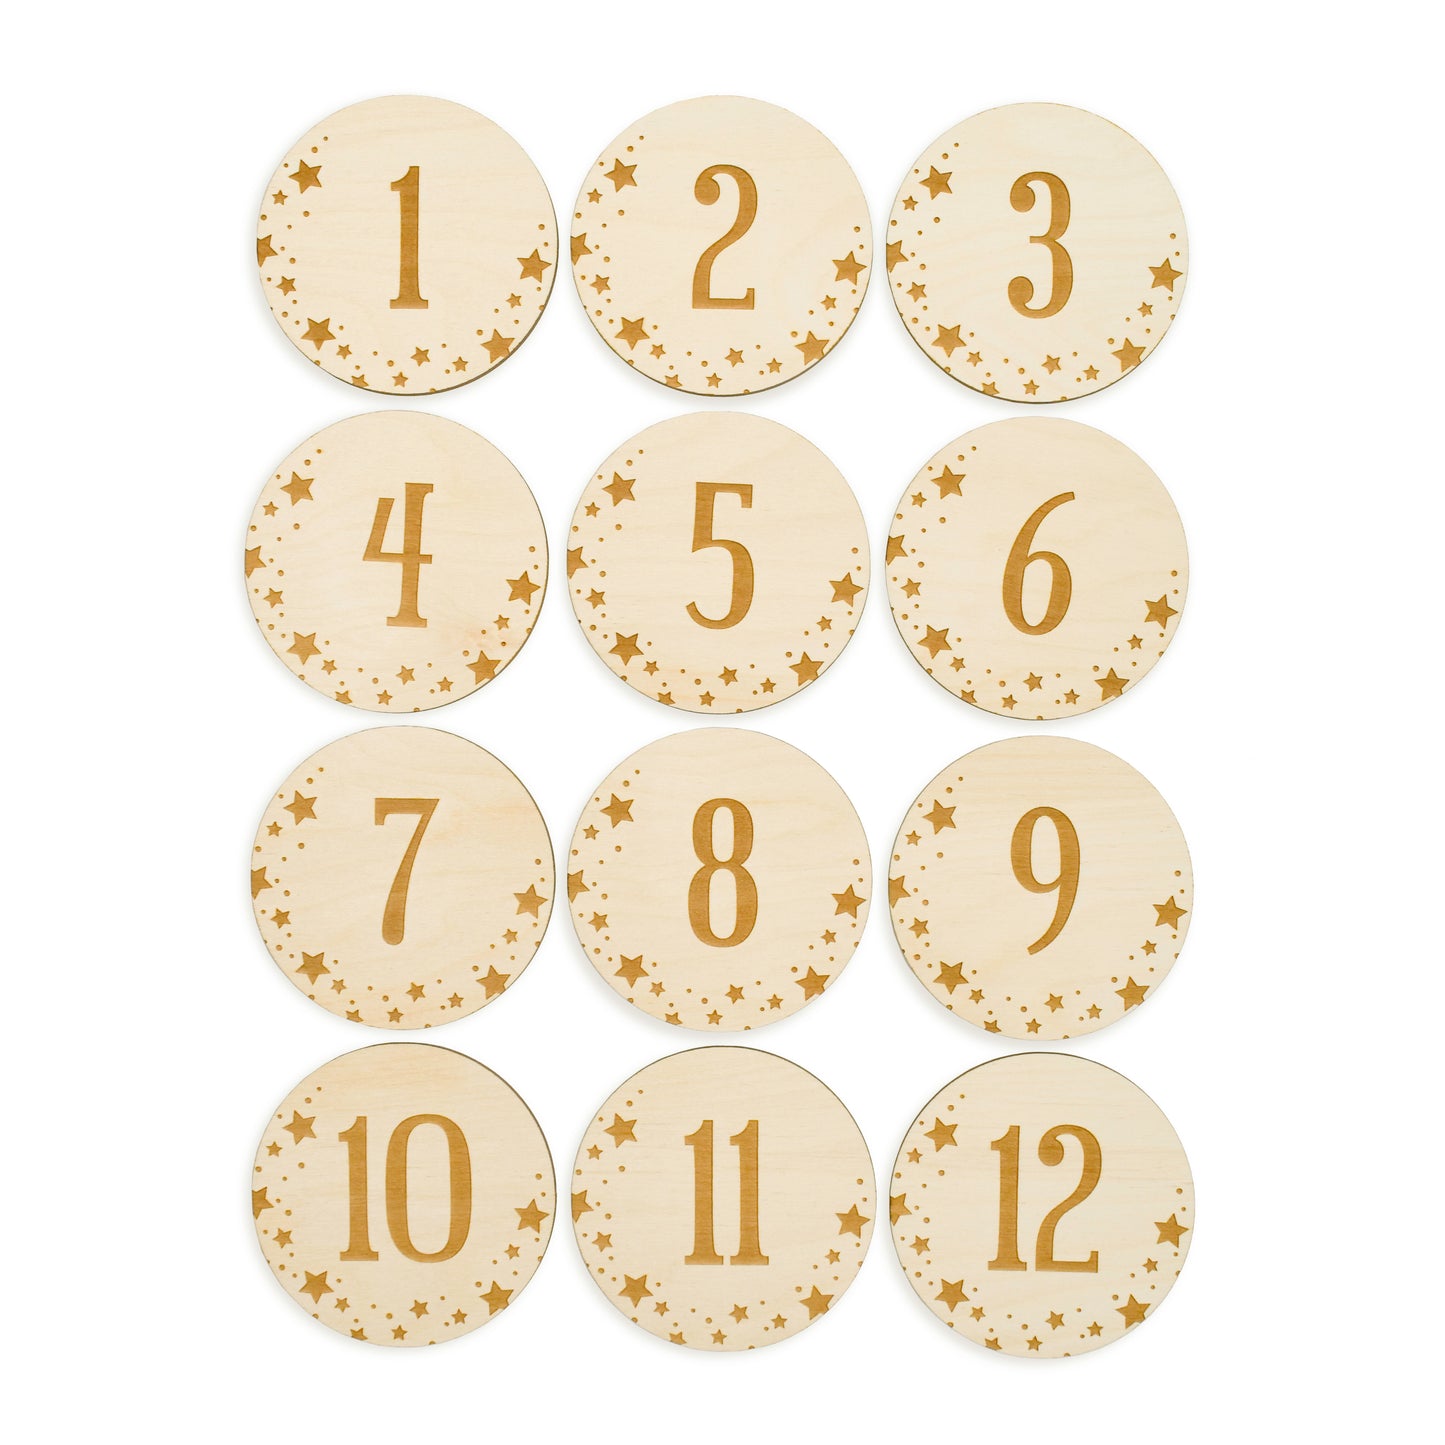 set of 12 monthly baby milestone signs with stars decoration on edges